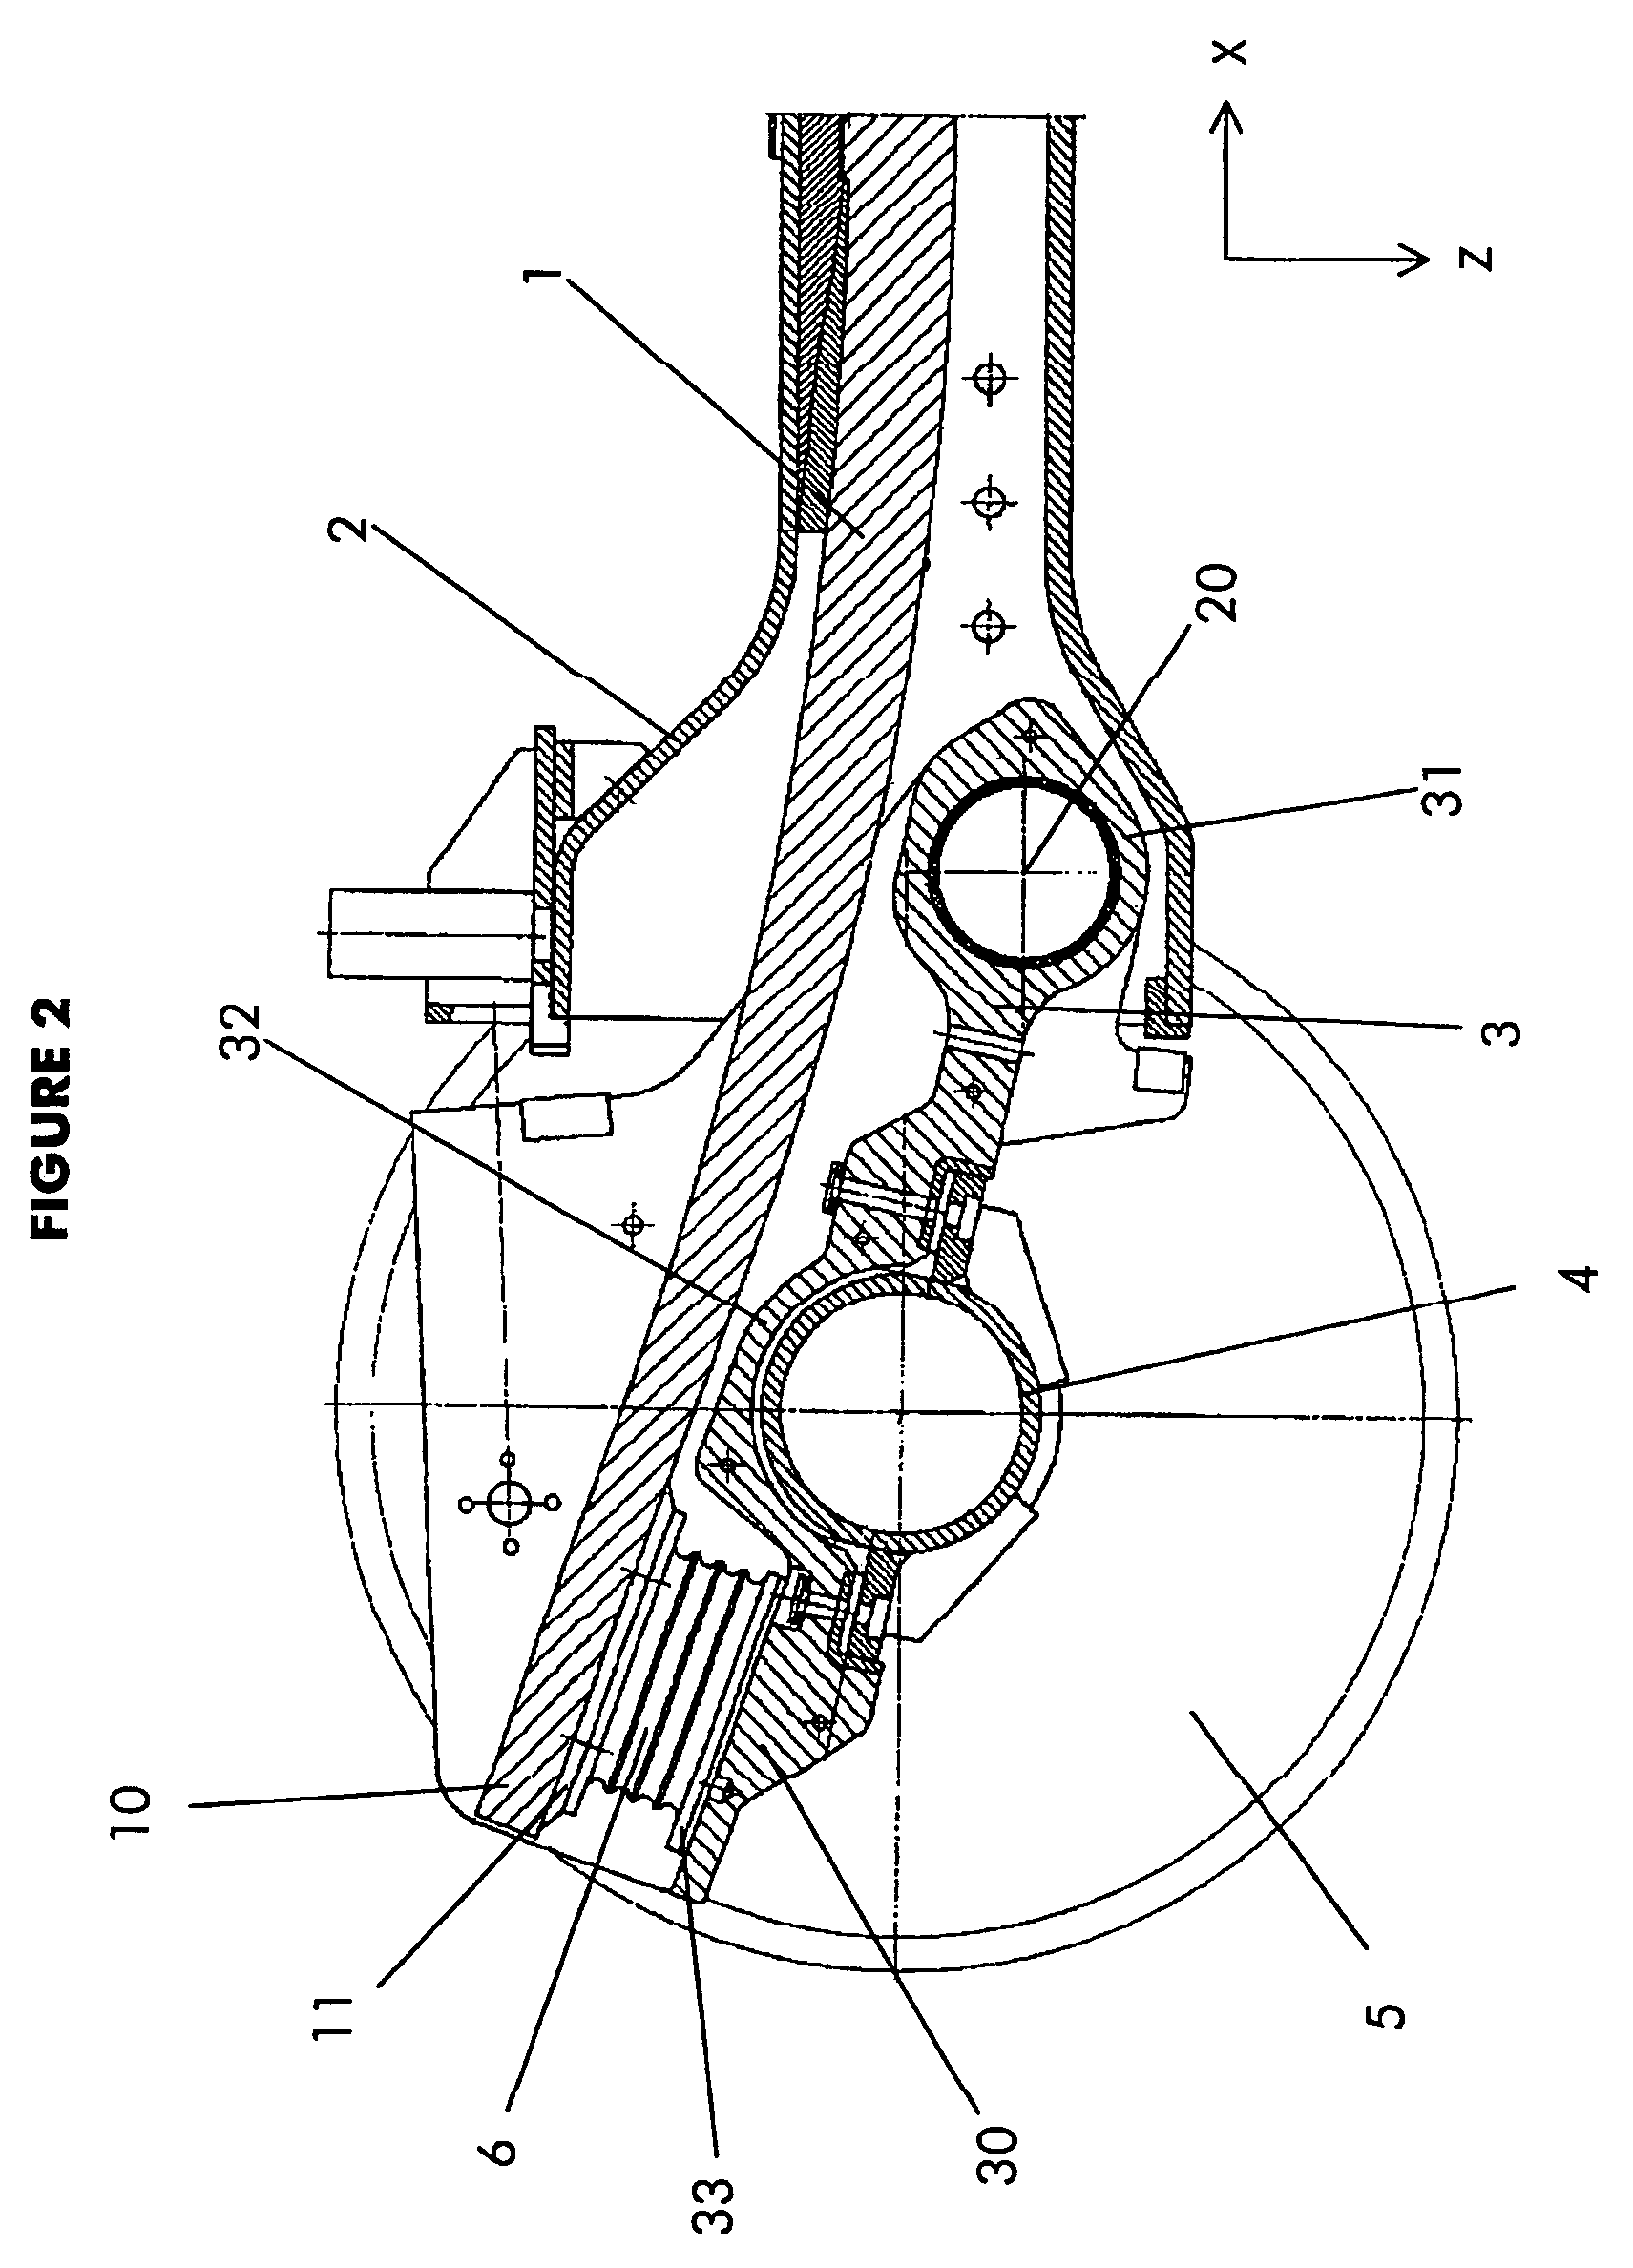 Flexible connection device between a bogey side beam and an axle-box